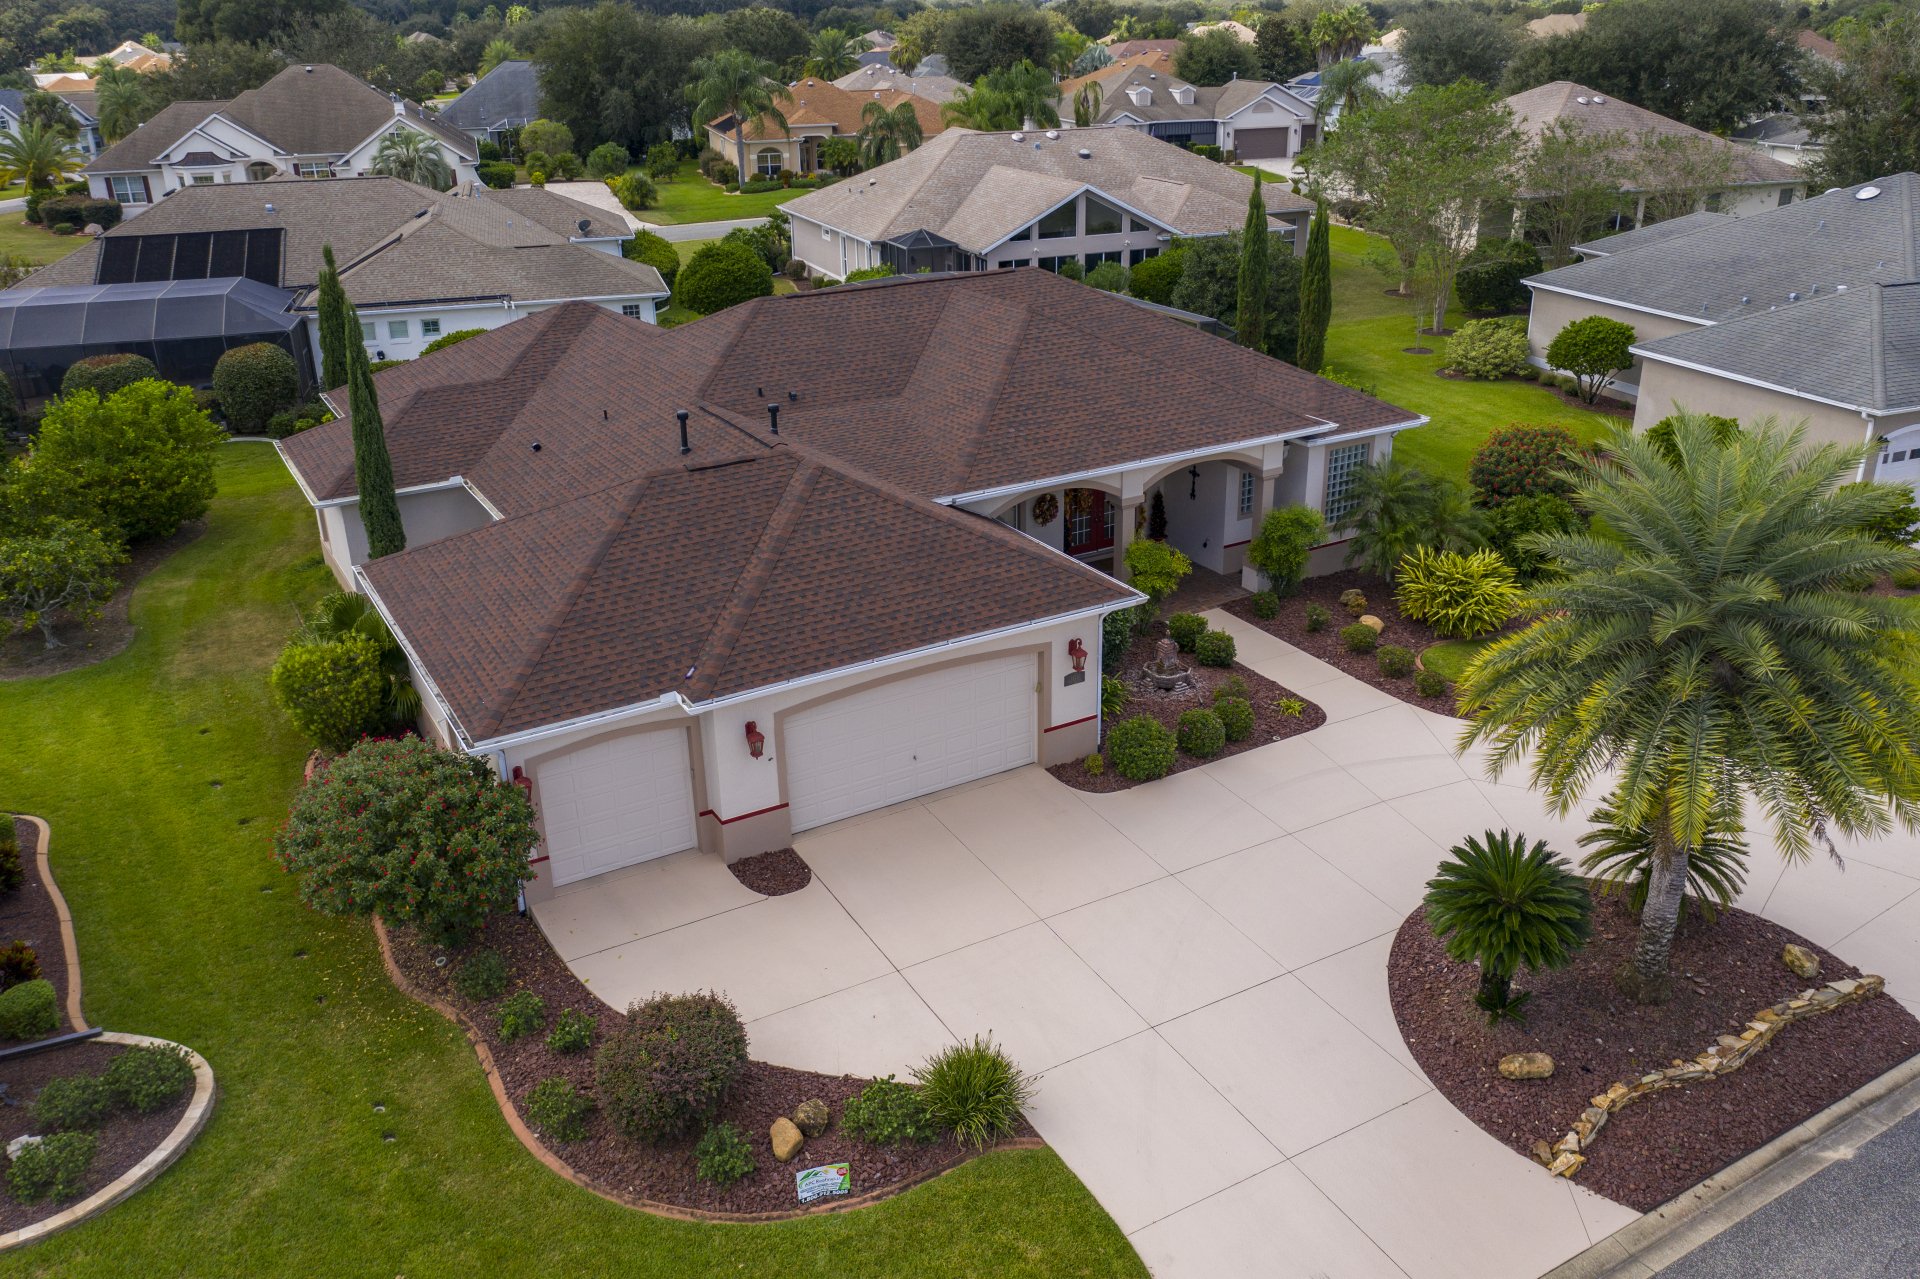 APC Roofing in Florida - Architectural Shingle Roof